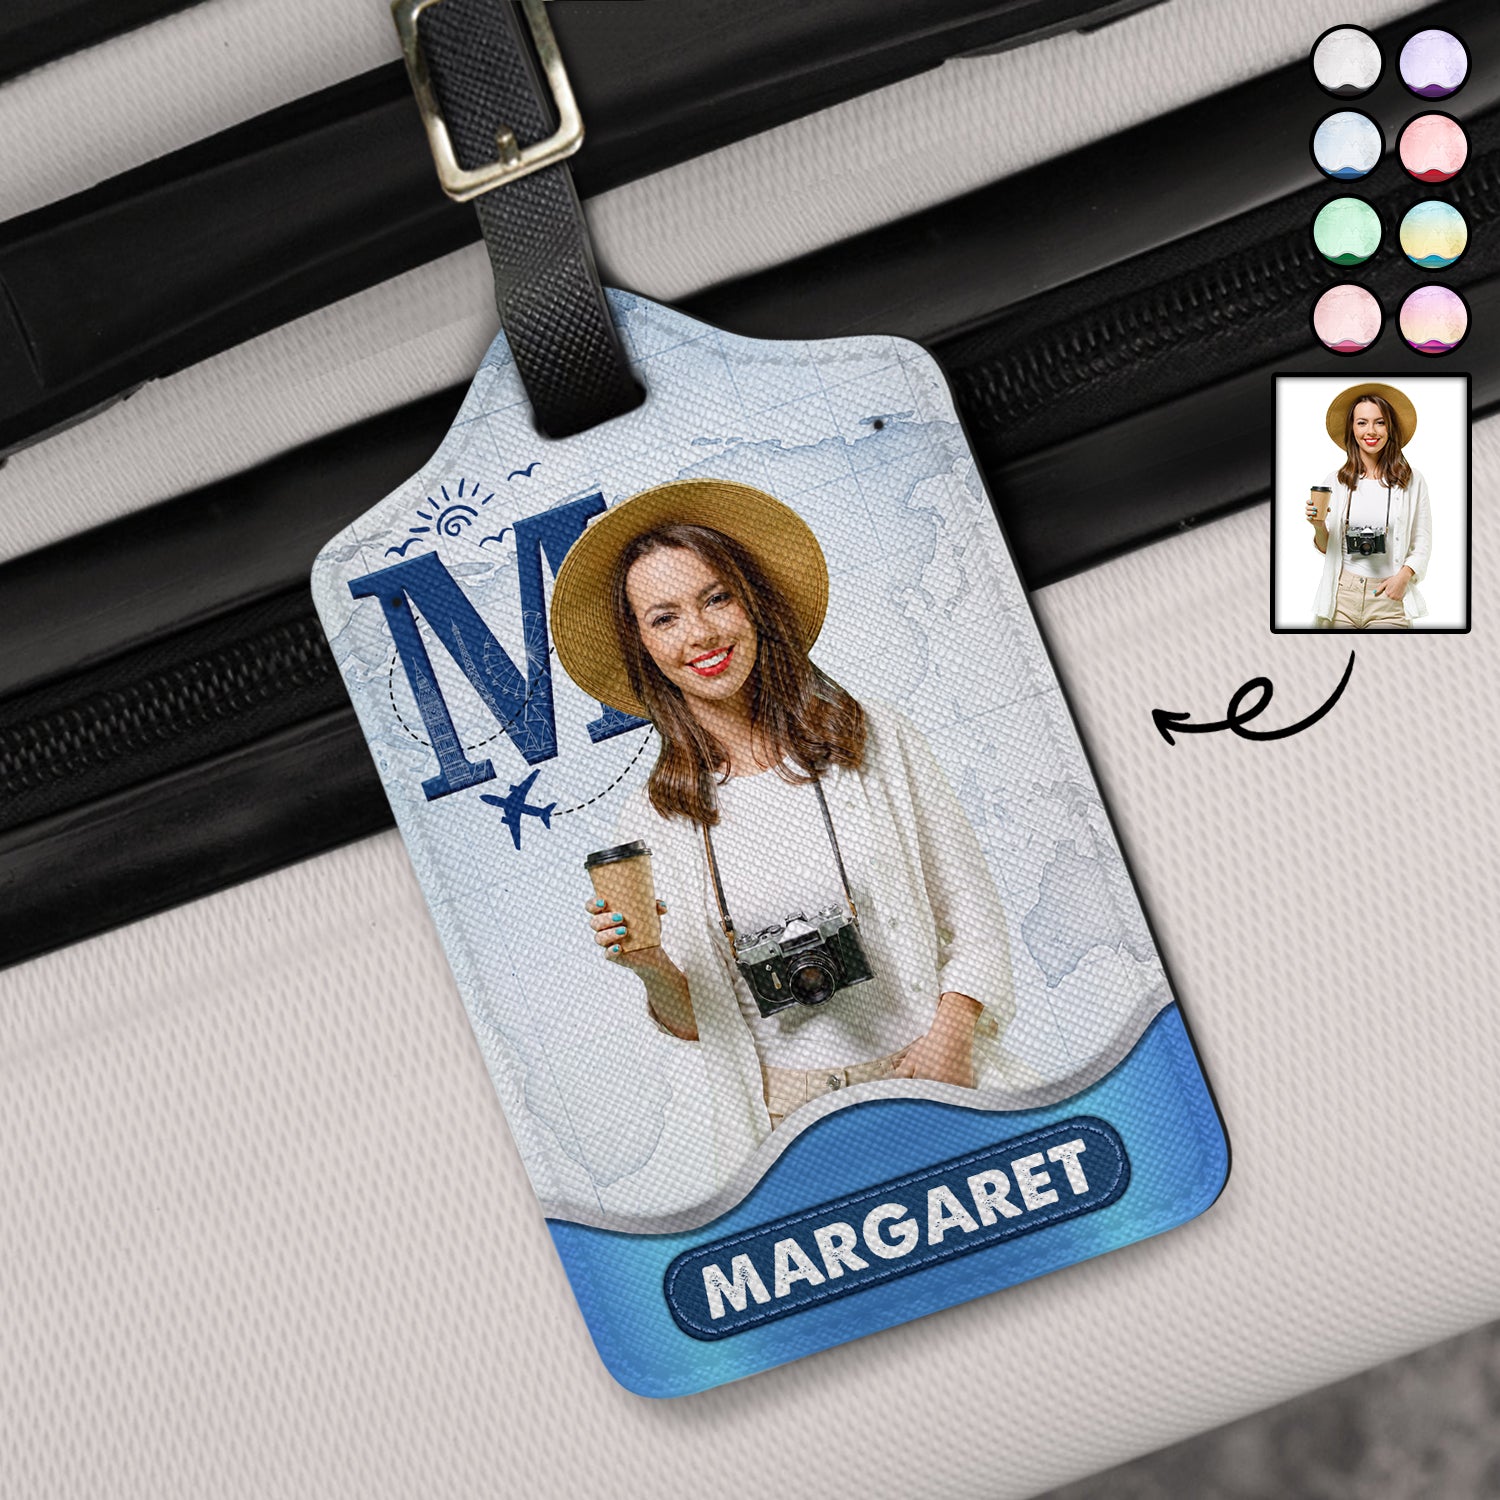 Custom Photo Monogram Traveling - Birthday Gift For Him, Her, Vacation Lovers - Personalized Luggage Tag